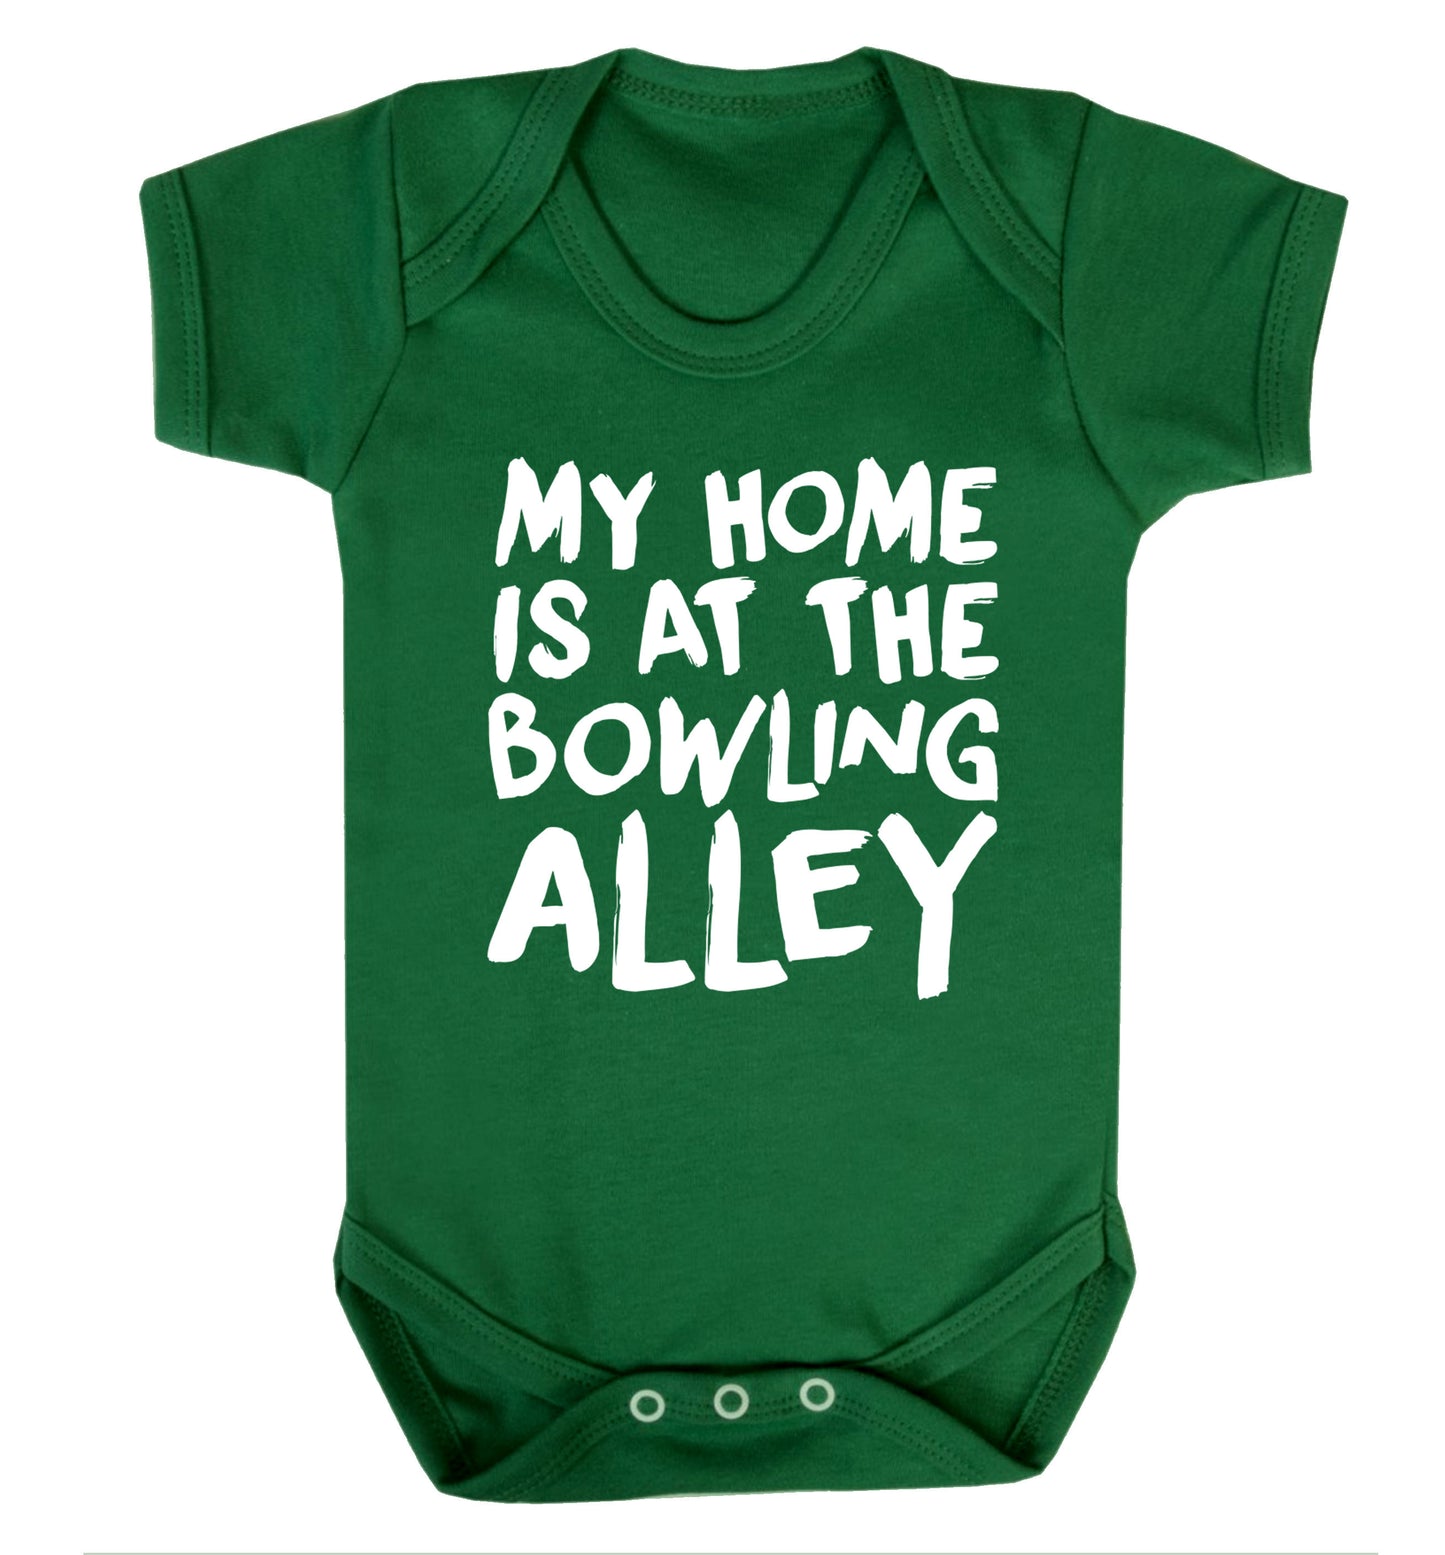 My home is at the bowling alley Baby Vest green 18-24 months